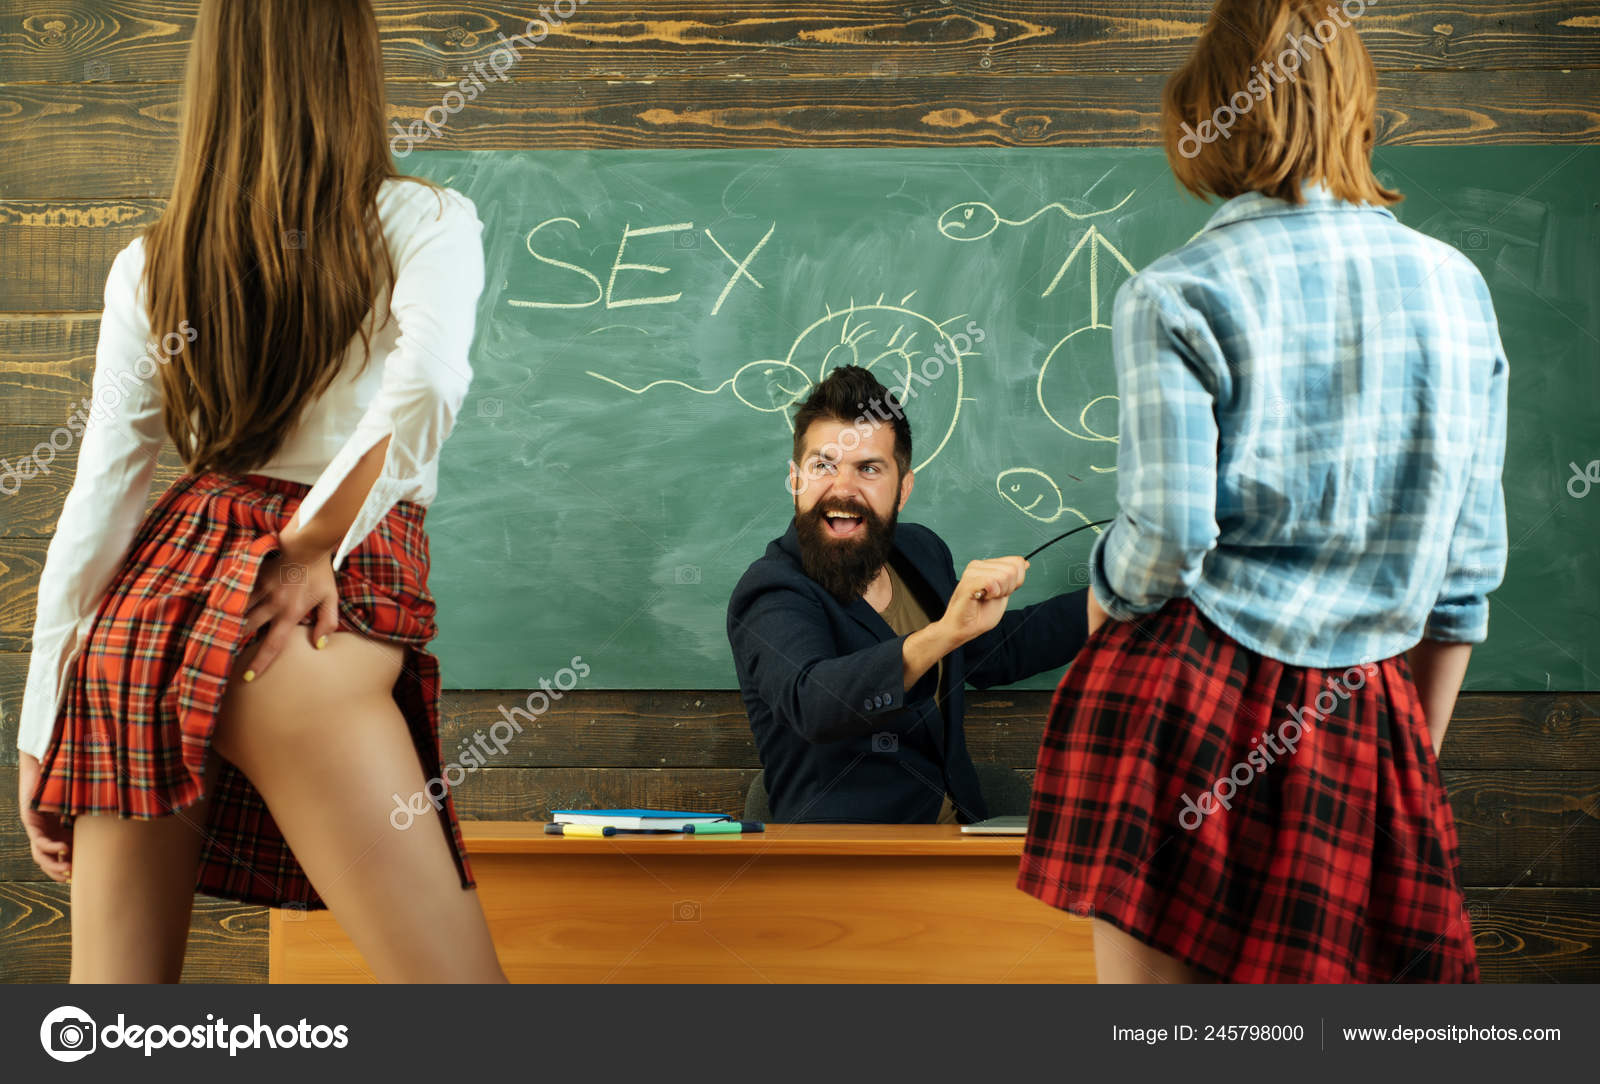 Symbols on chalkboard. Lesson and sex education in high school. Sexology teacher looks at two sexy female students pic